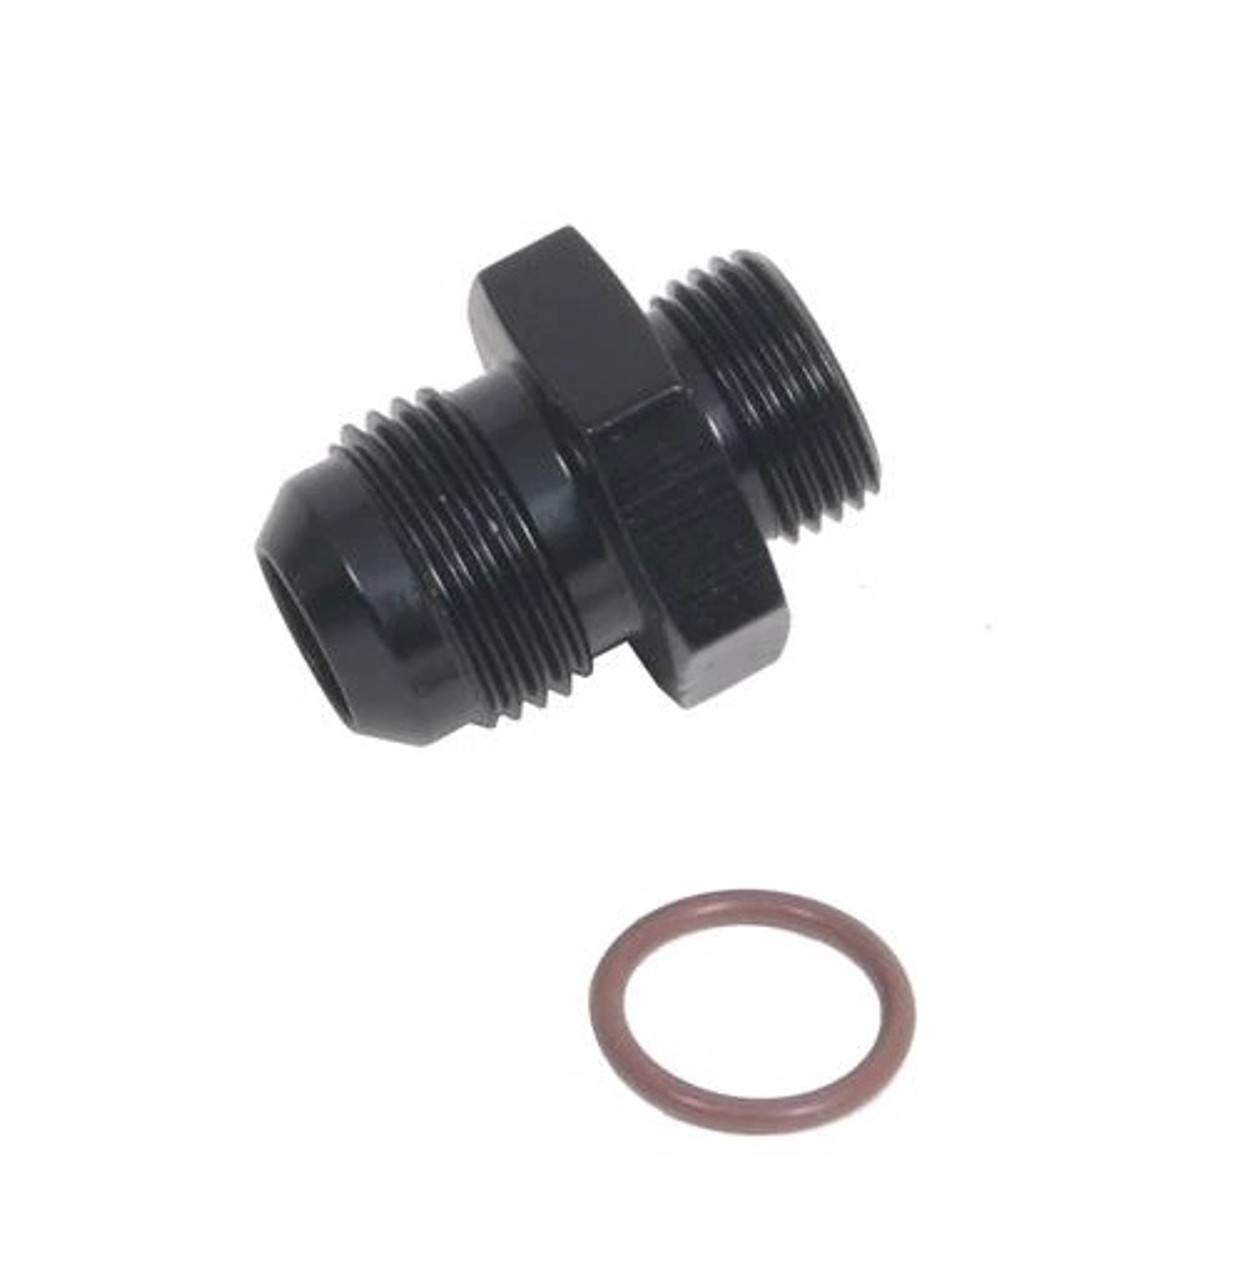 Fragola -10 AN x -10 ORB (7/8-14 O-Ring) Adapter 495106-BL